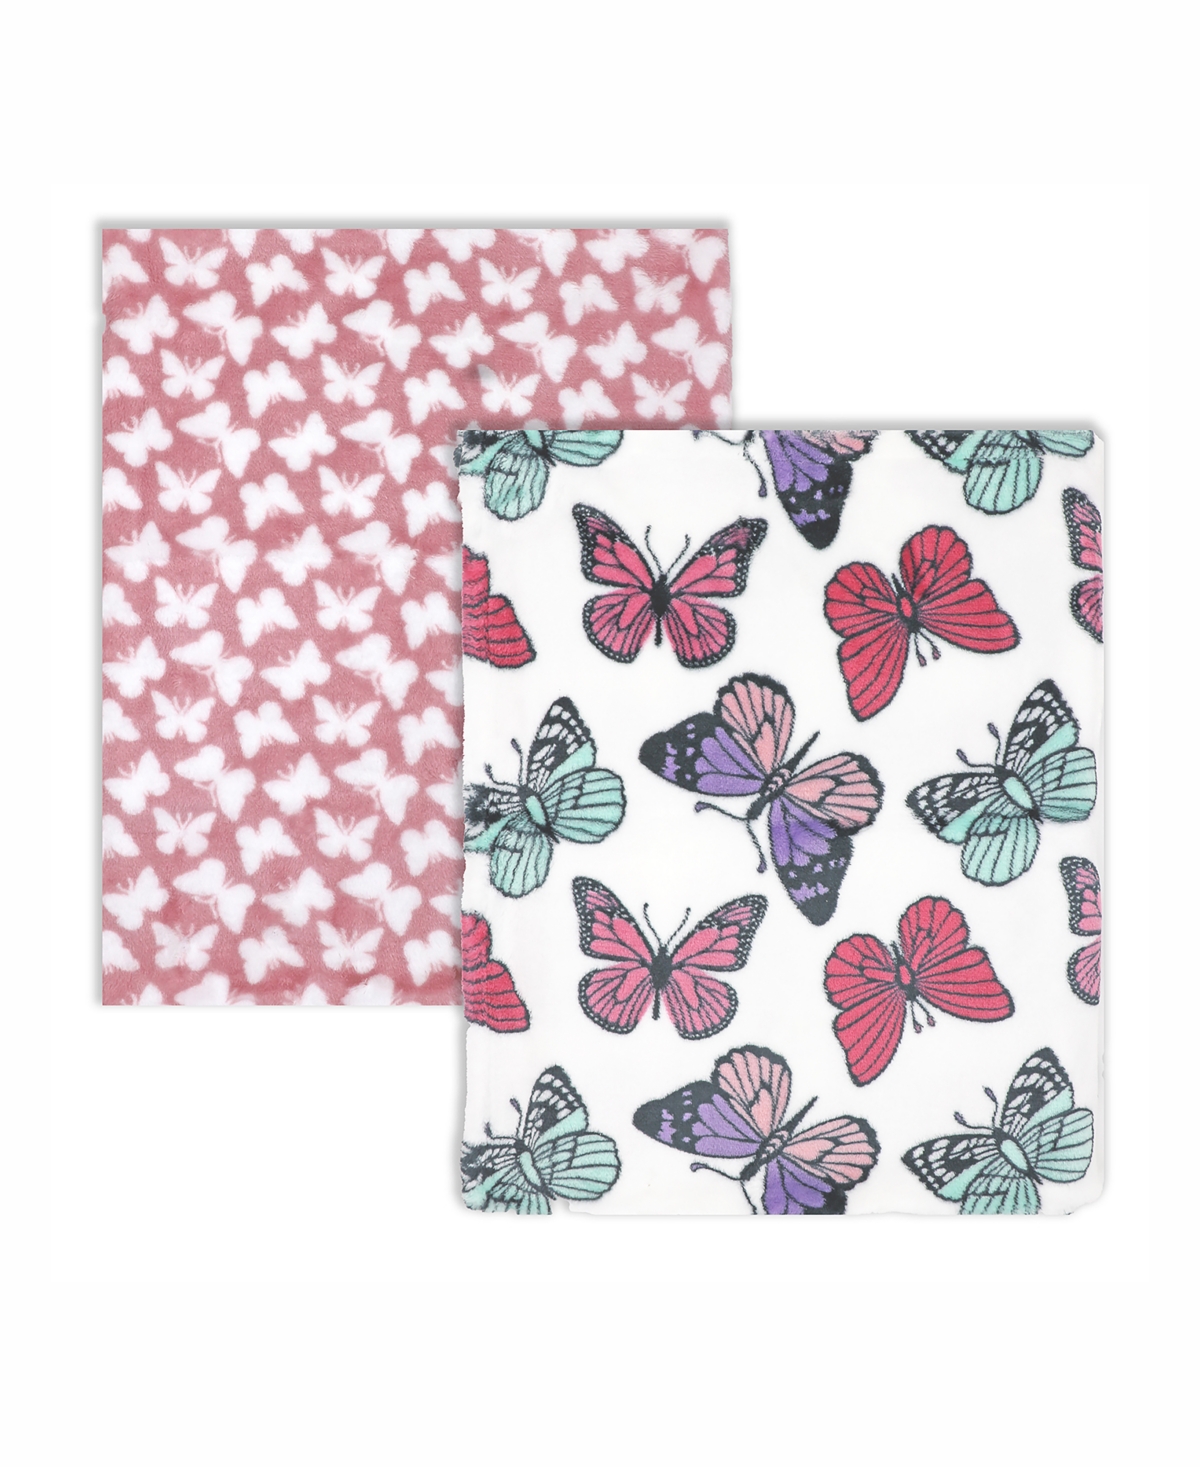 3 Stories Trading Baby Girls Cozy Flannel Fleece Blankets, Pack Of 2 In Fuchsia And Pink